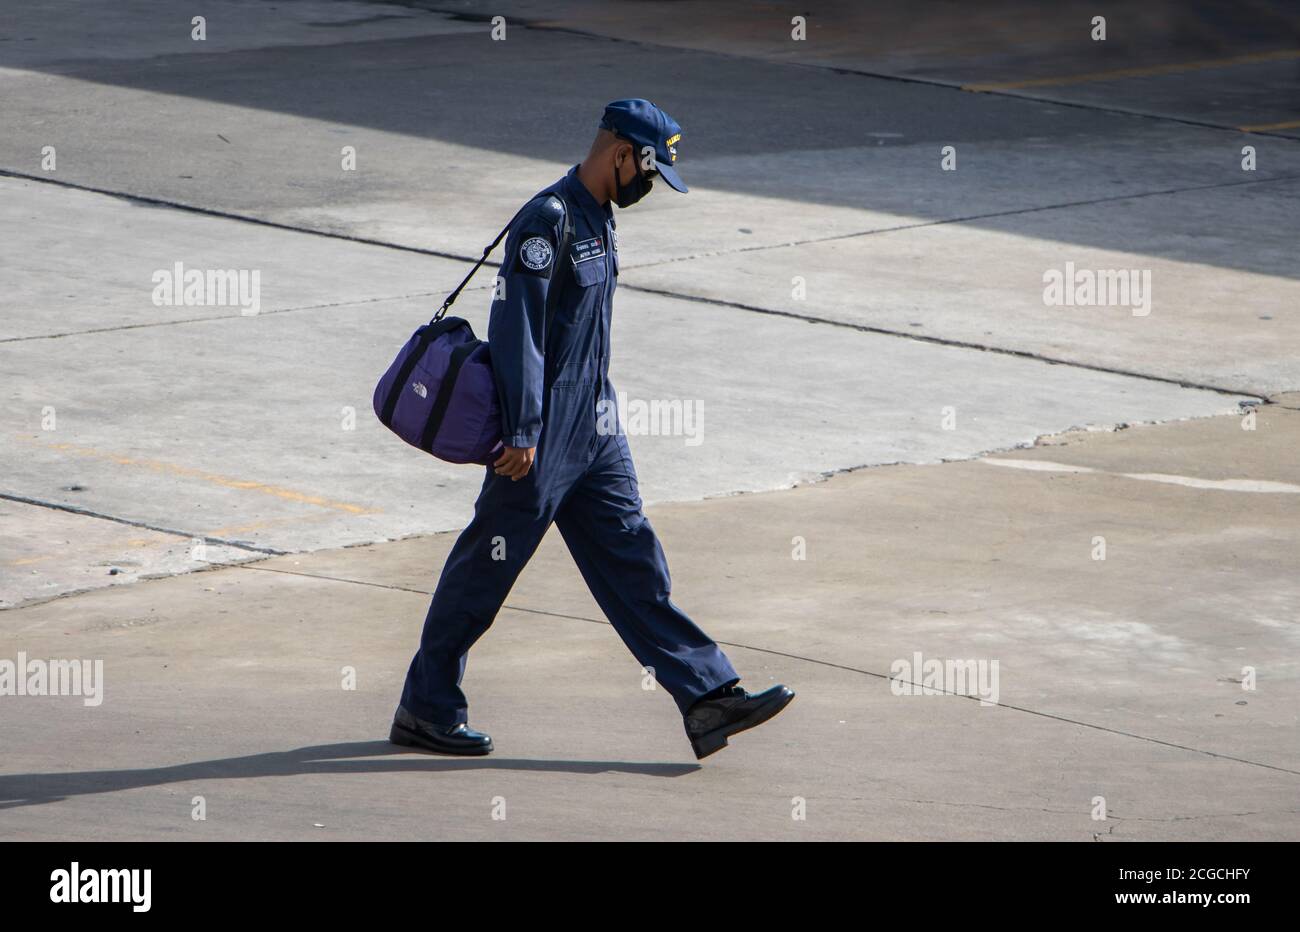 SAMUT PRAKAN, THAILAND, JUN 26 2020, A man in a blue overalls with the HTMS Sichang emblem walks on the street. Stock Photo